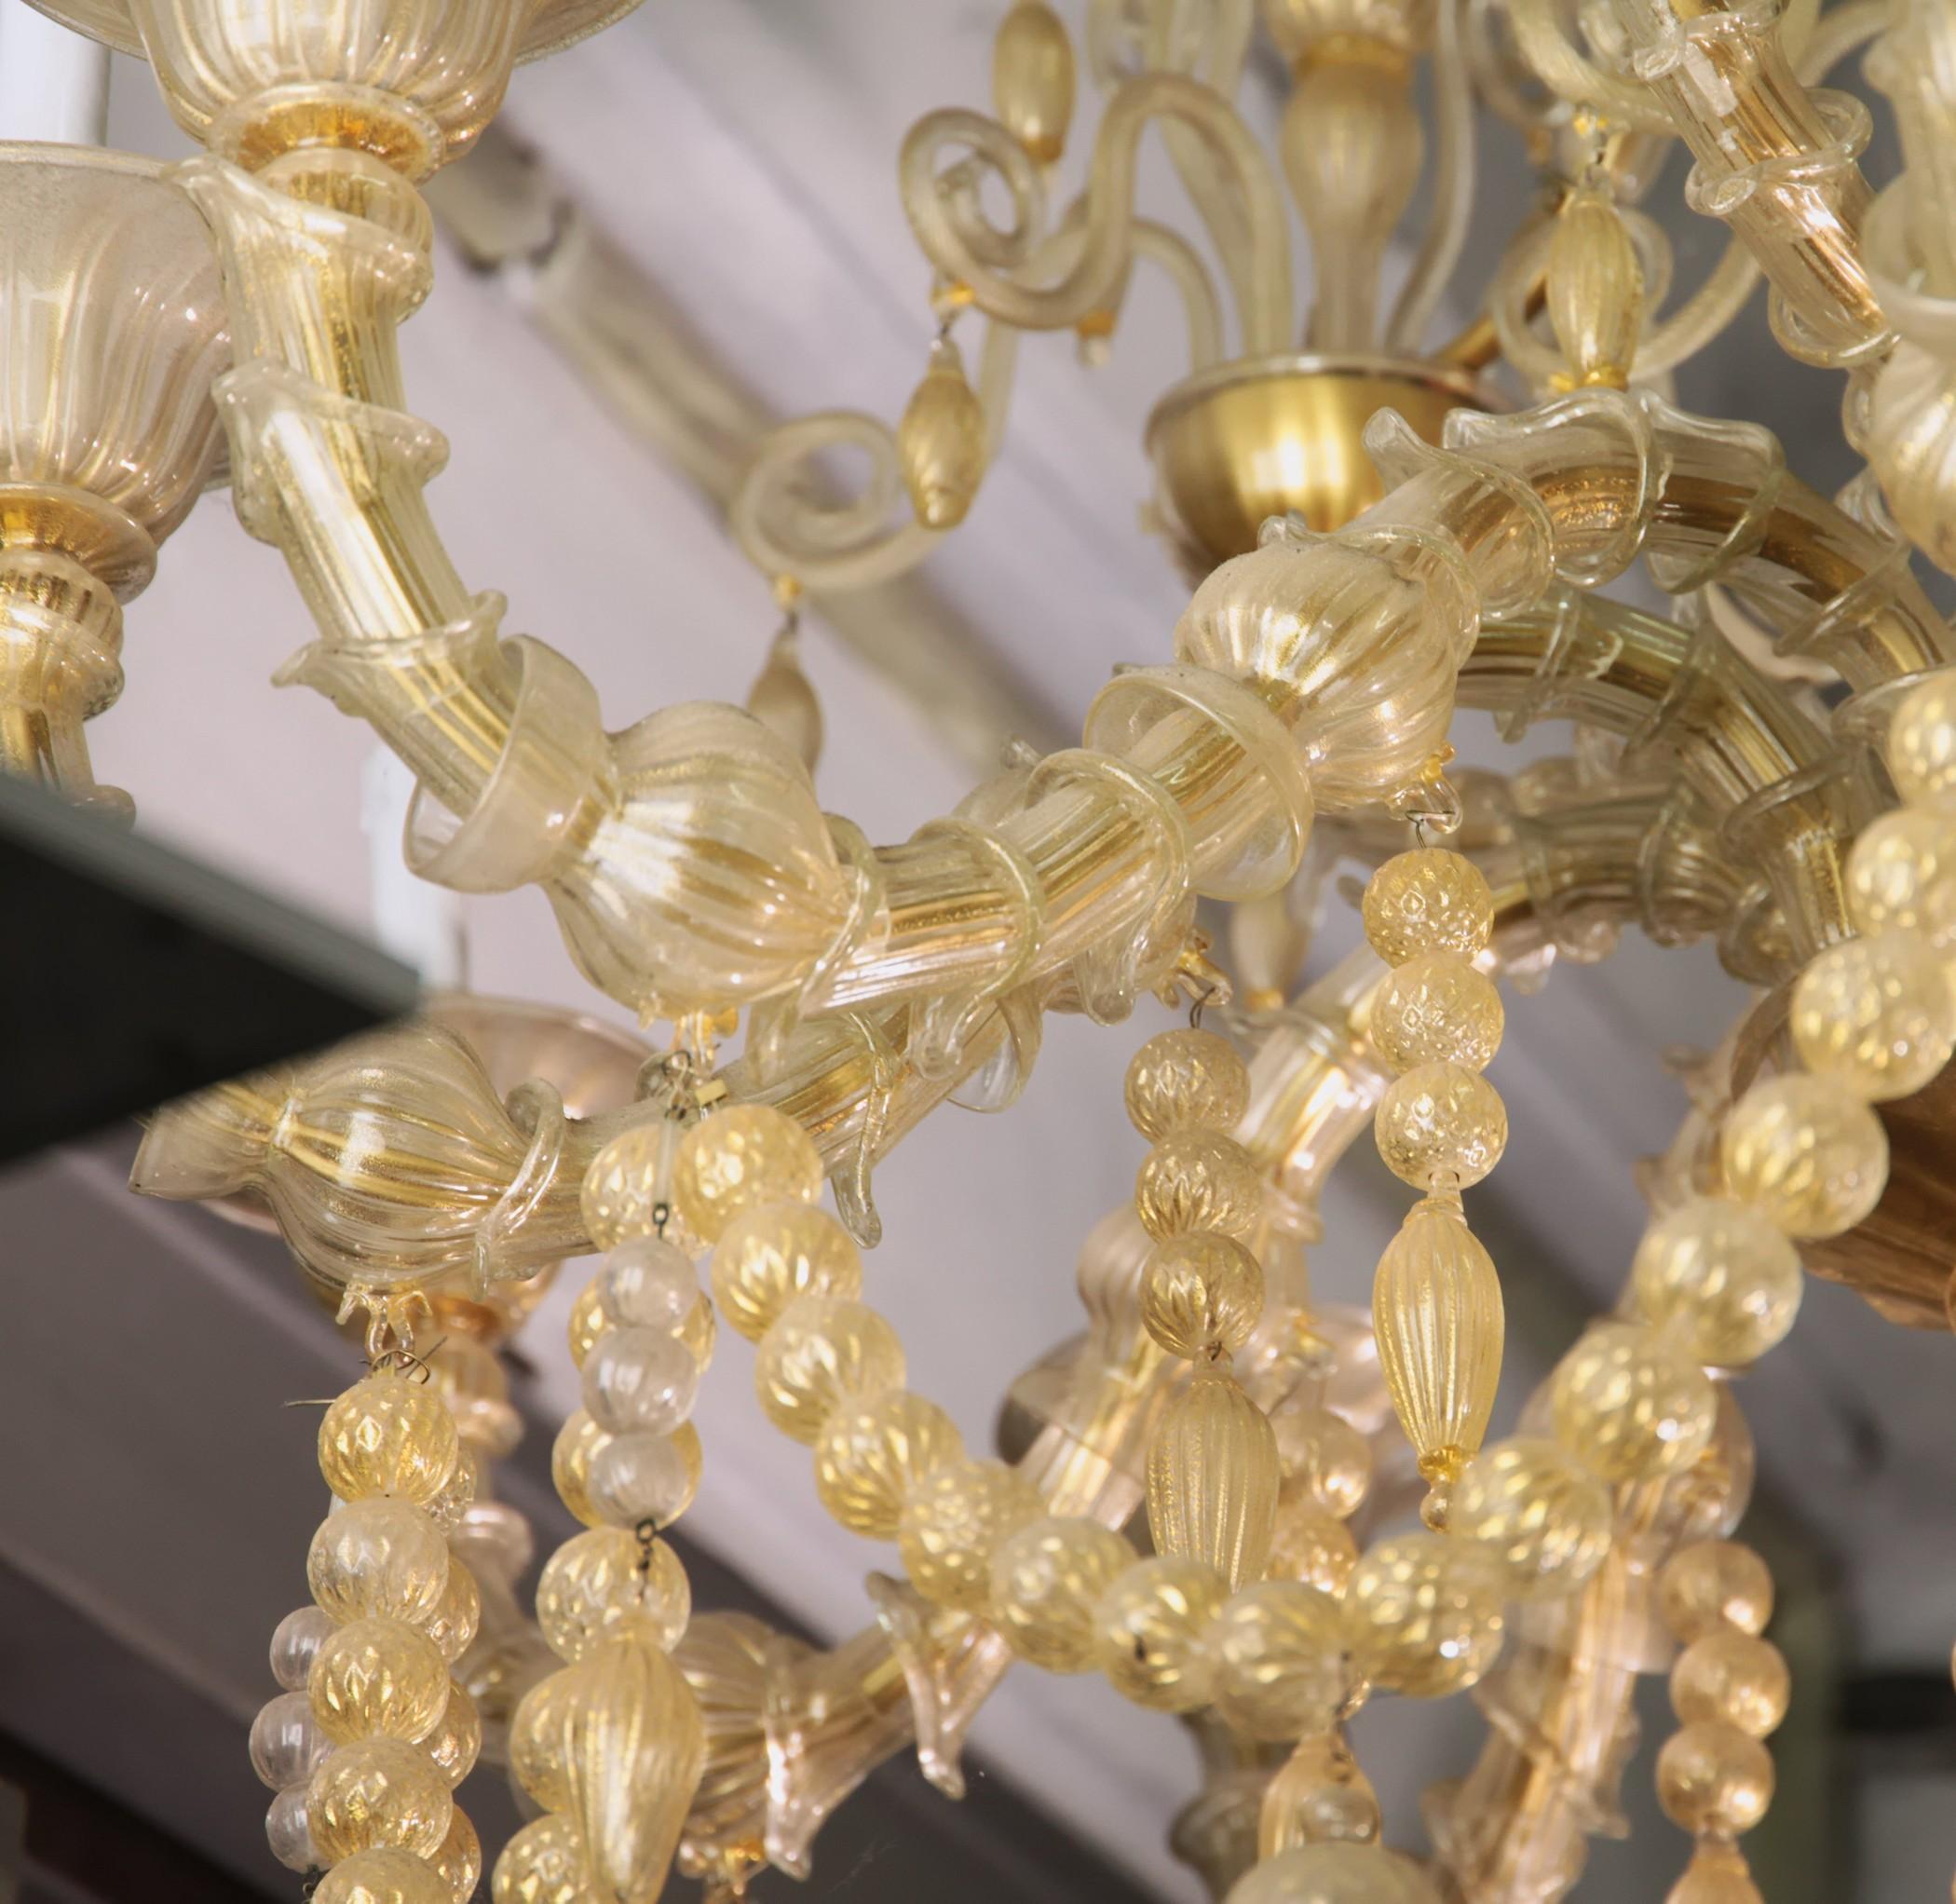 Grand Ca Rezzonico chandelier. All made in clear glass with 24-karat gold leaf embedded into glass.
The use of gold leaf highlights and bring preciousness to the chandelier.
There are two highlights on this chandelier, the first is a row of glass